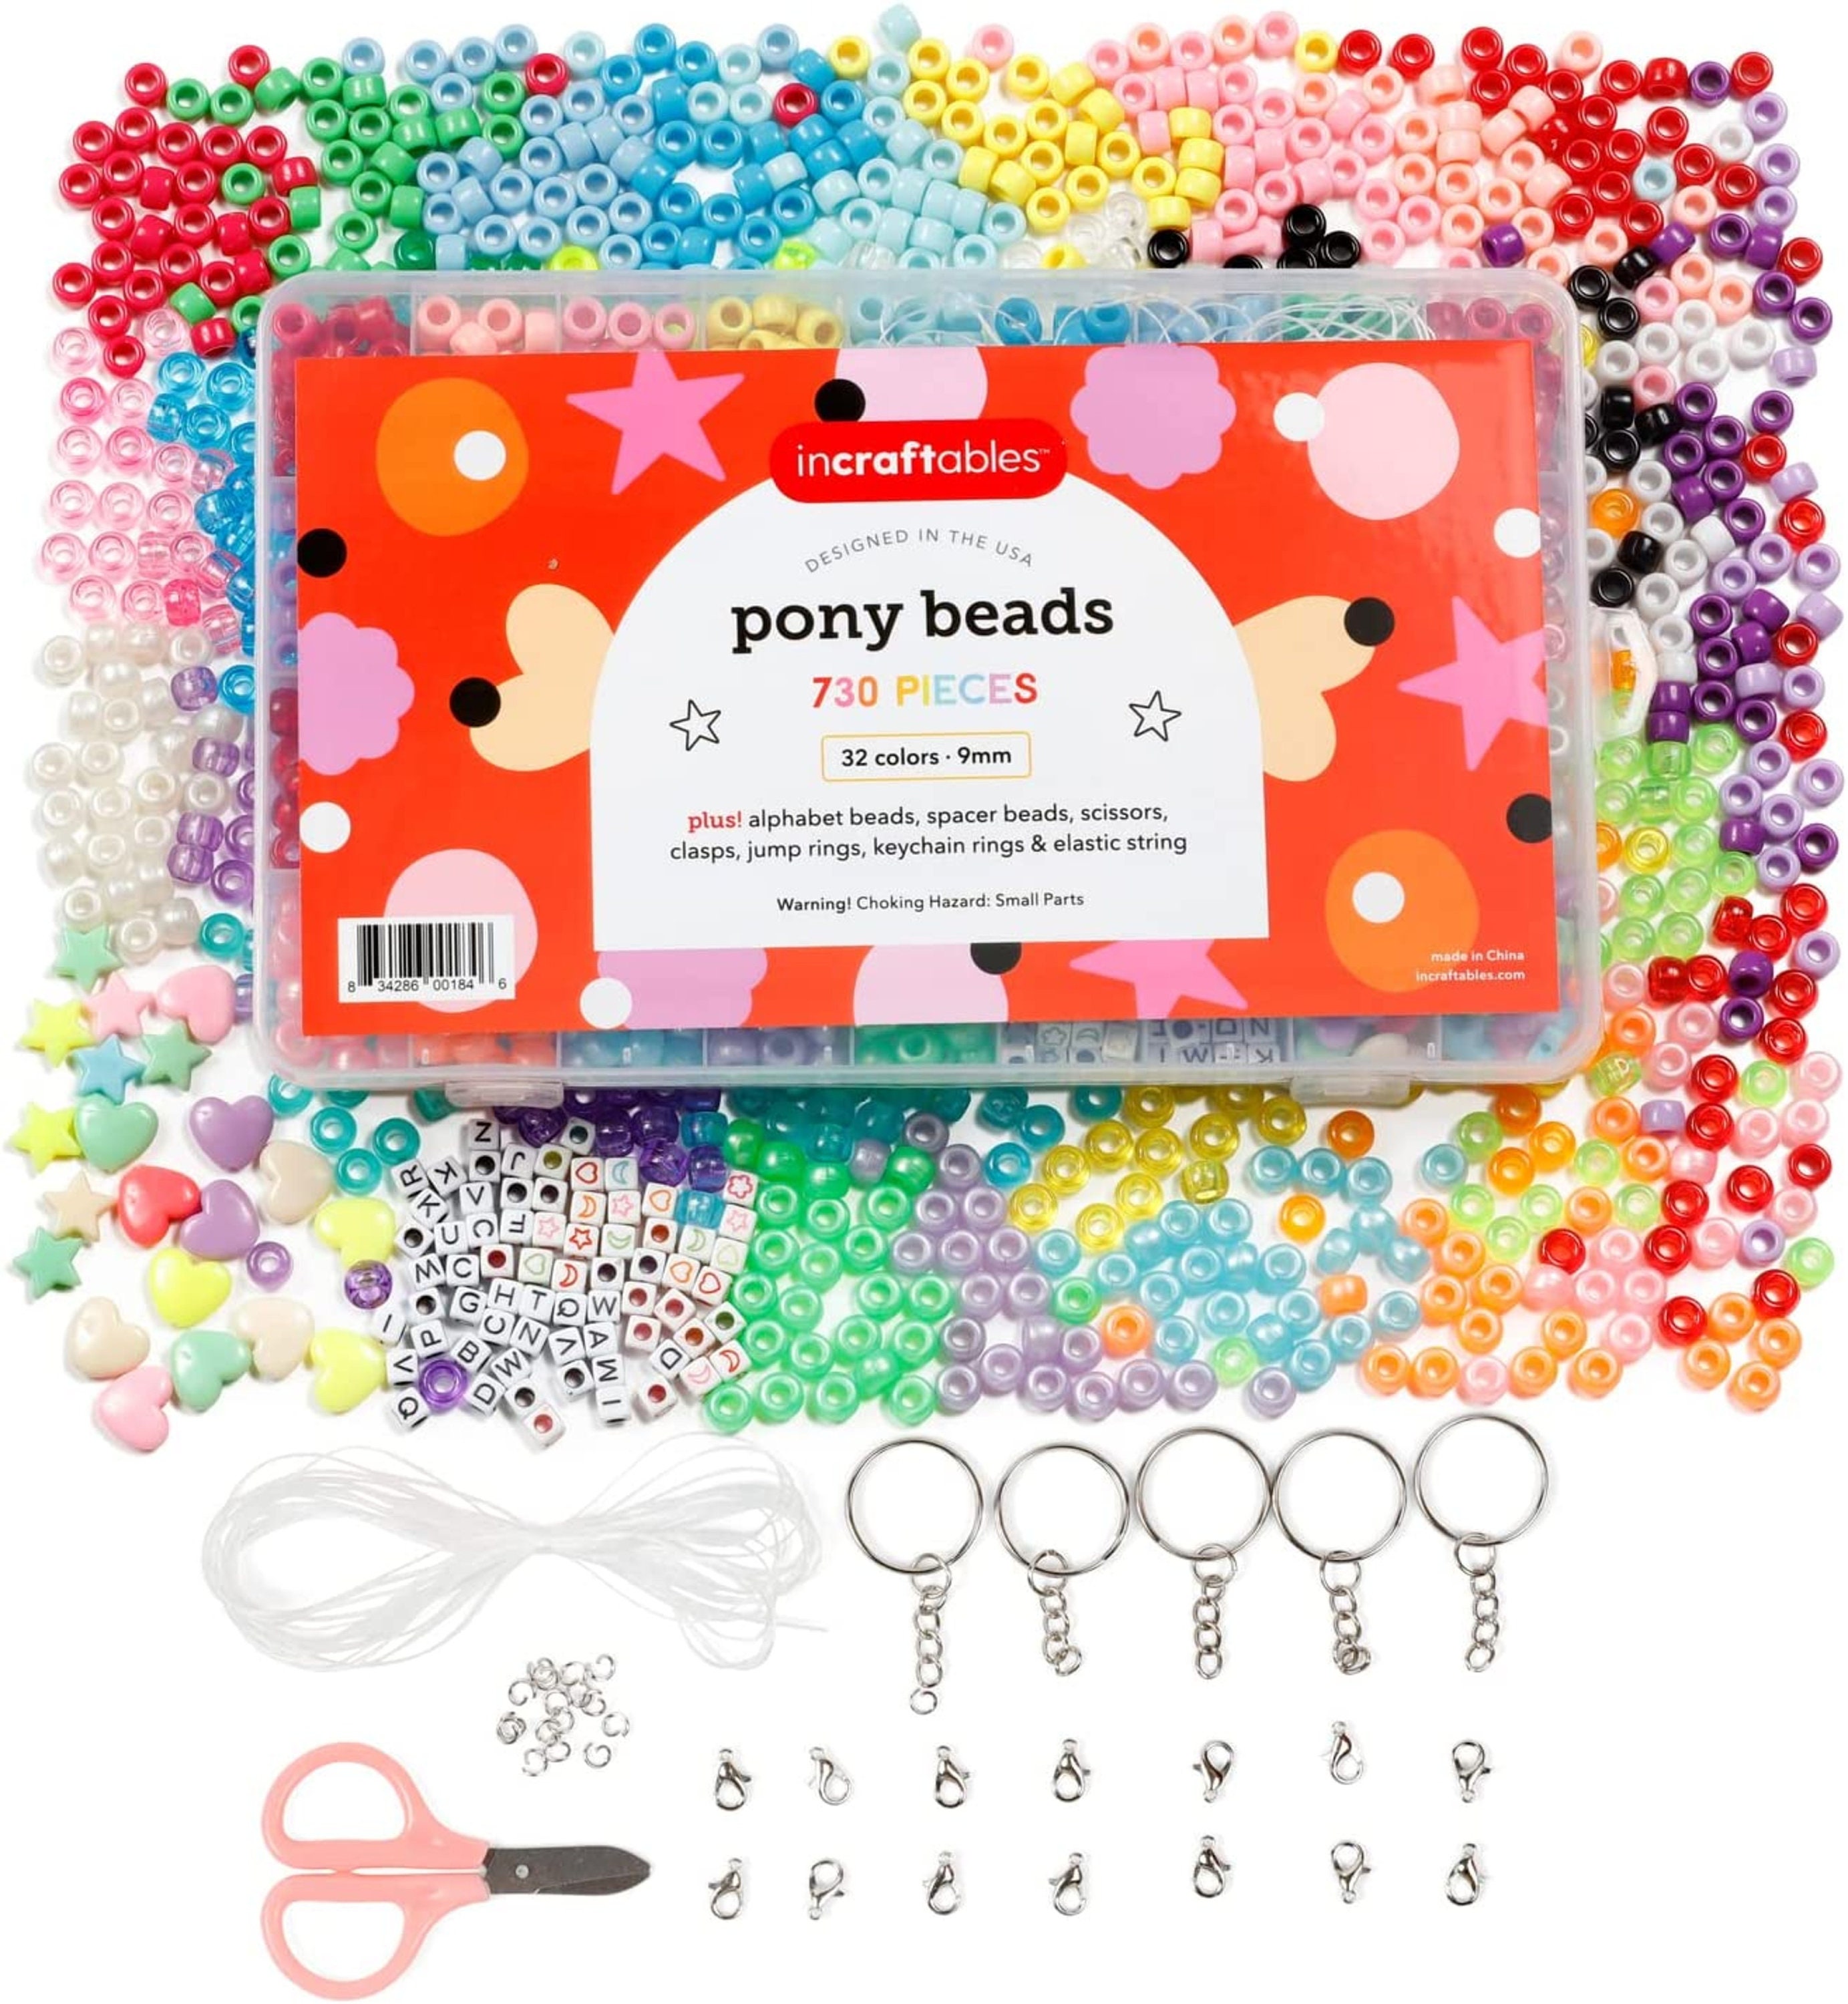 1100pcs Pony Beads,Friendship Bracelet Beads Kit,Beads for Jewelry  Making,Hair Beads,Beads for Bracelets Making,Beads for Crafts Pony Beads  Bulk Kandi